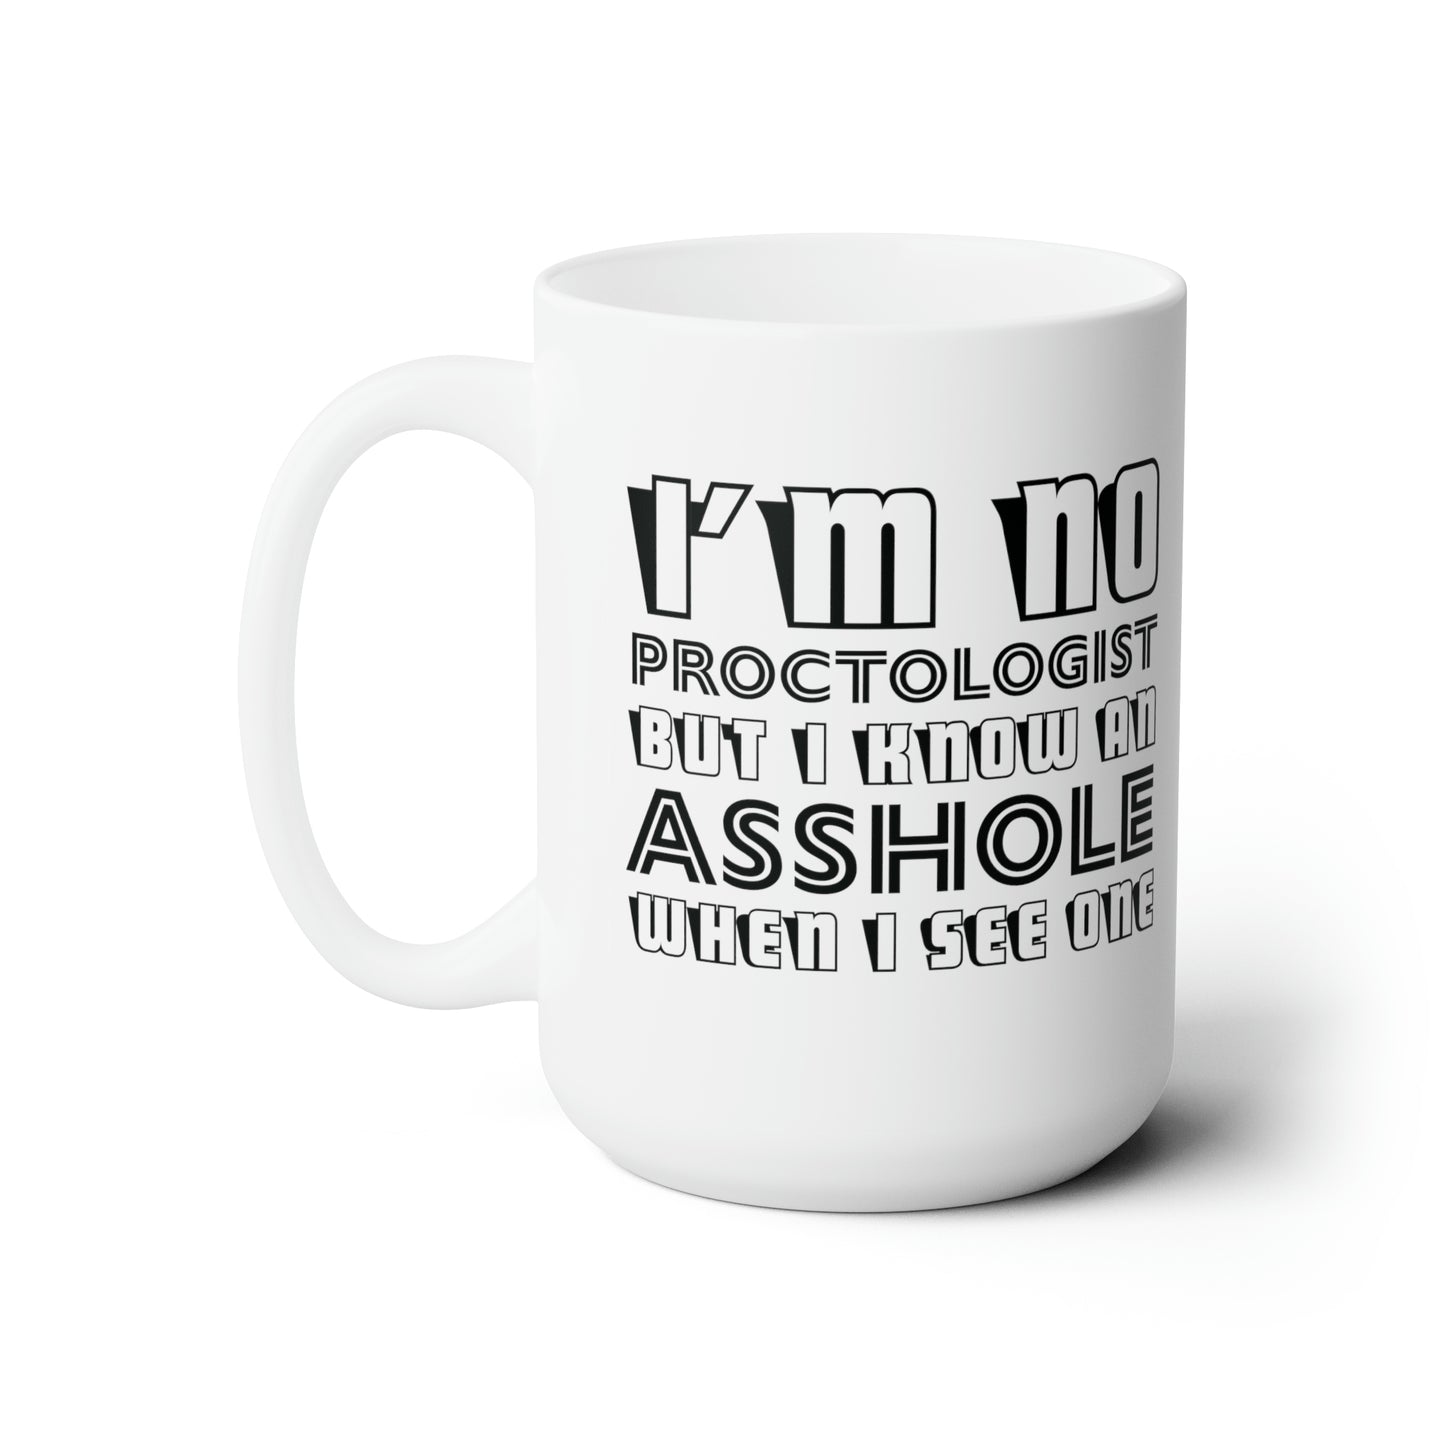 Proctologist Coffee Mug For Sarcastic Humor Hot Tea Cup For Funny Gift